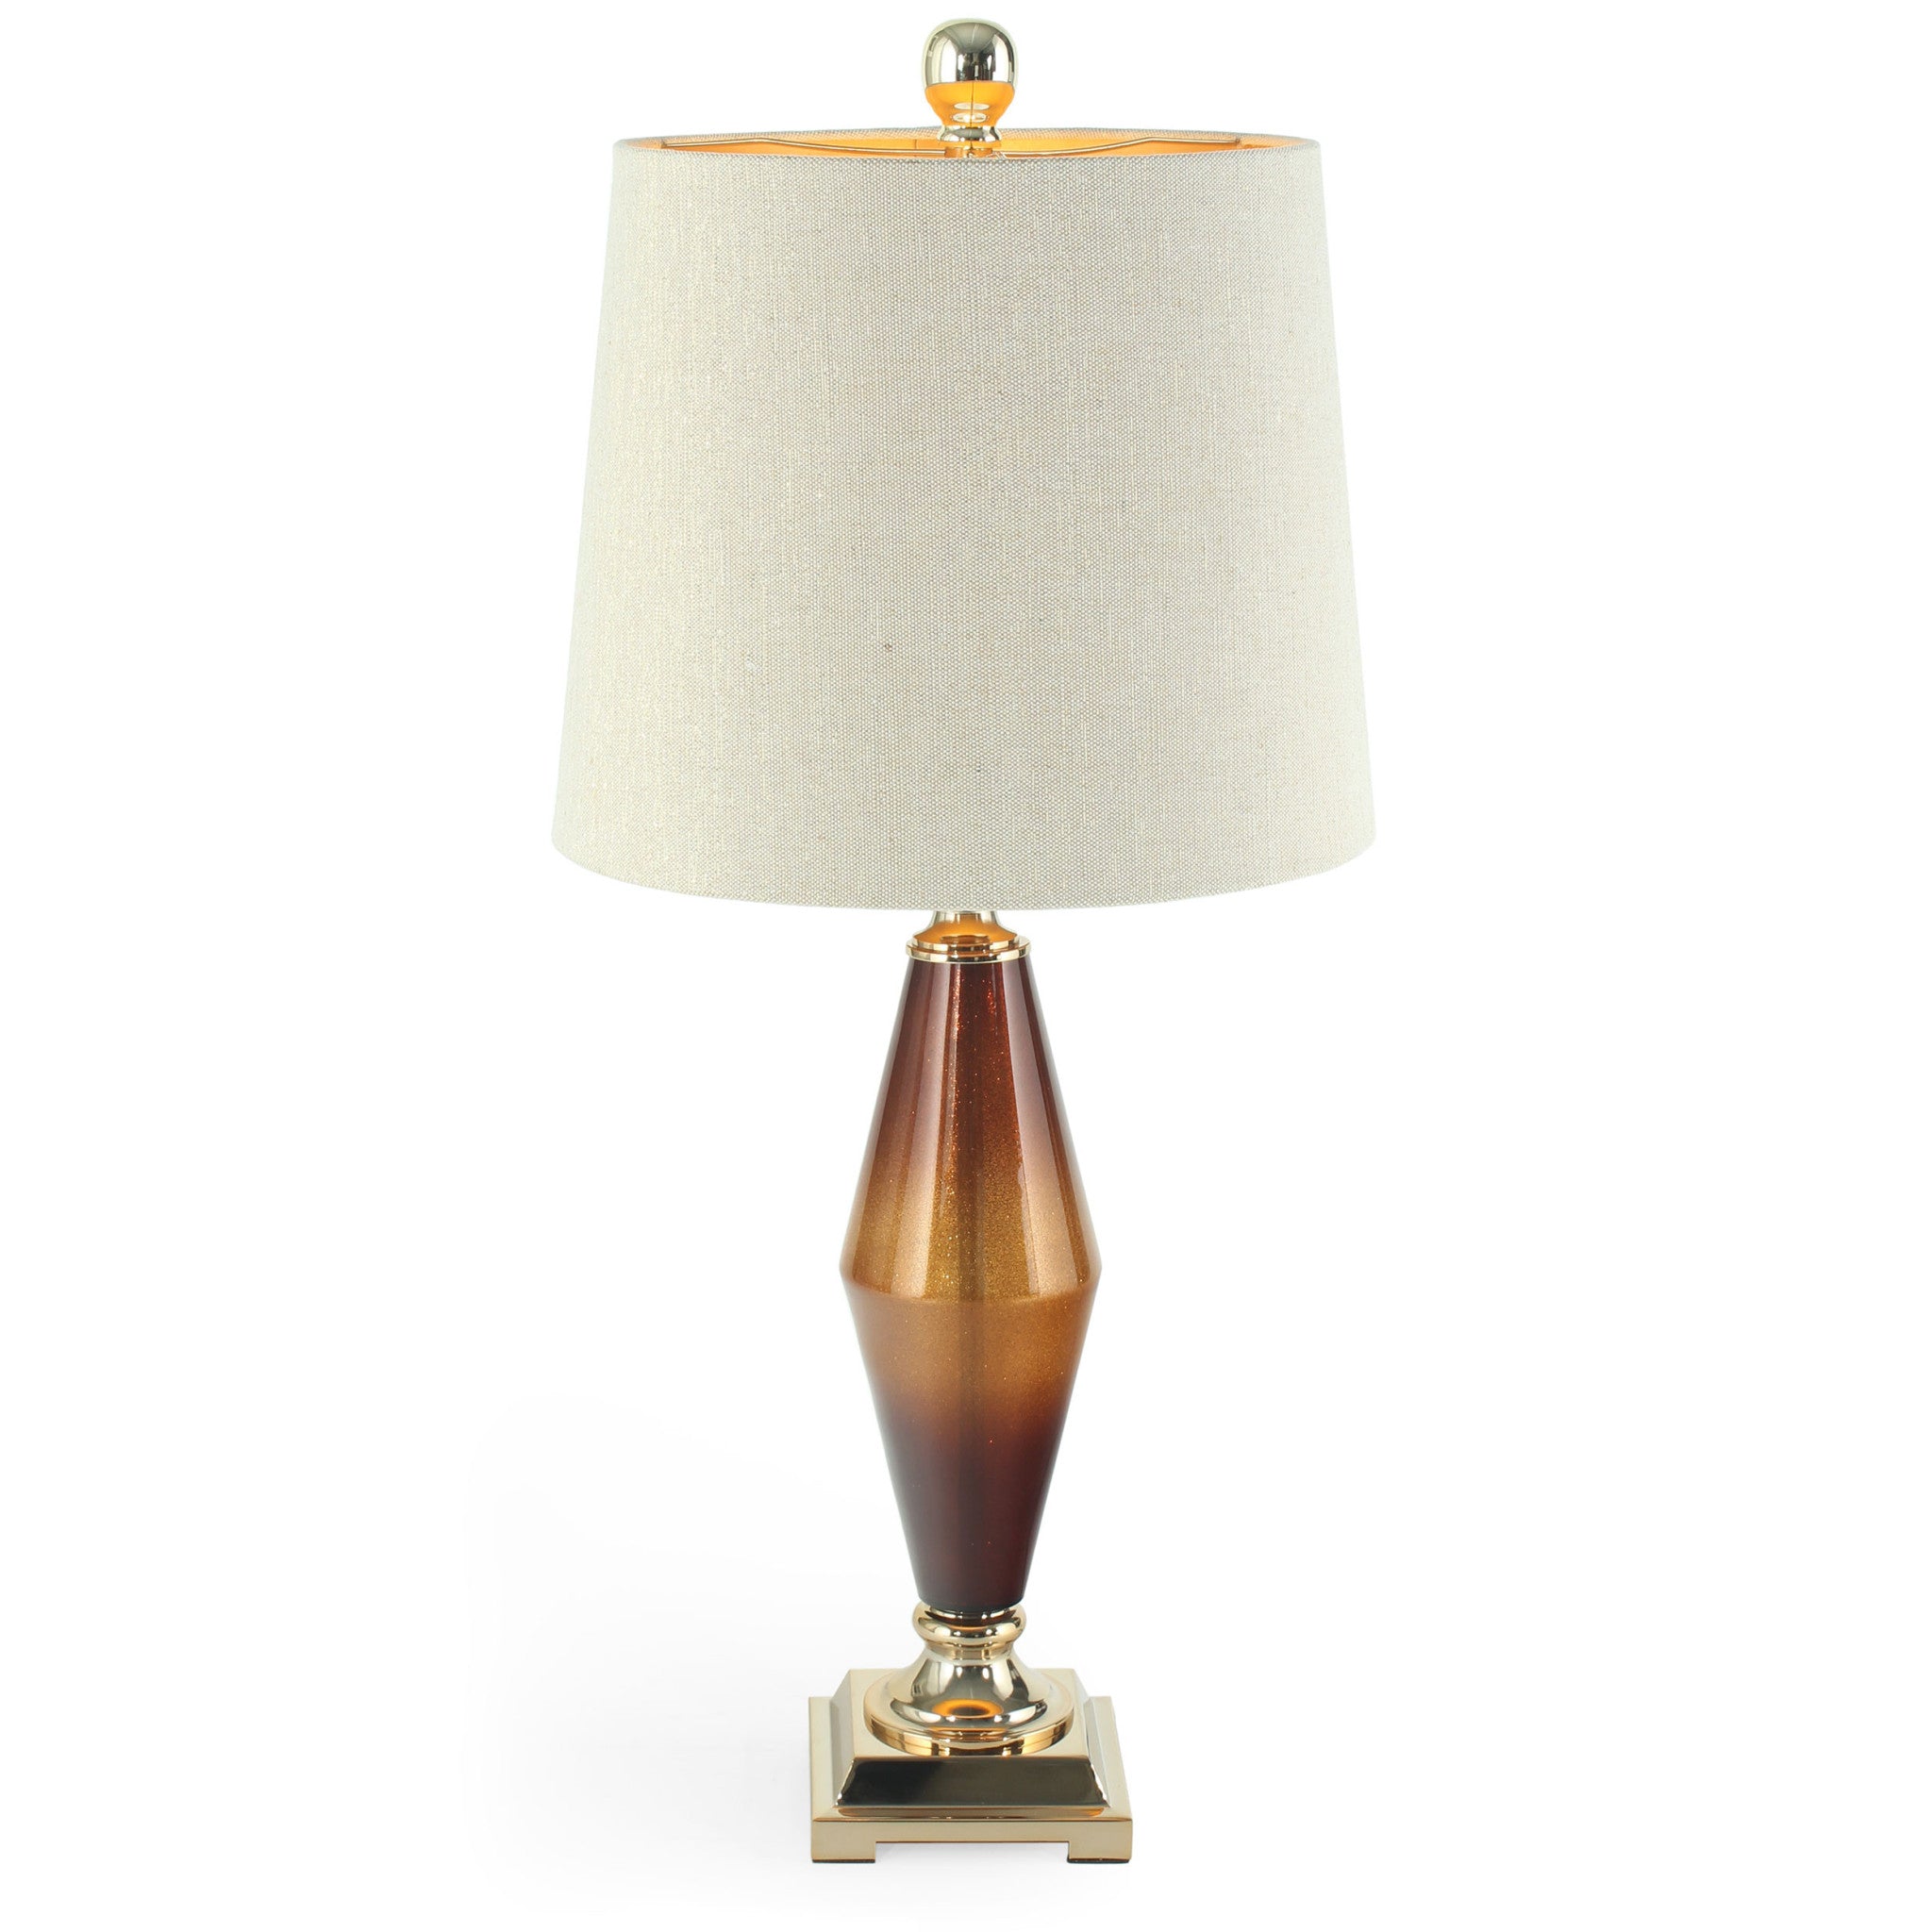 33" Amber Glass LED Table Lamp With Beige Cone Shade